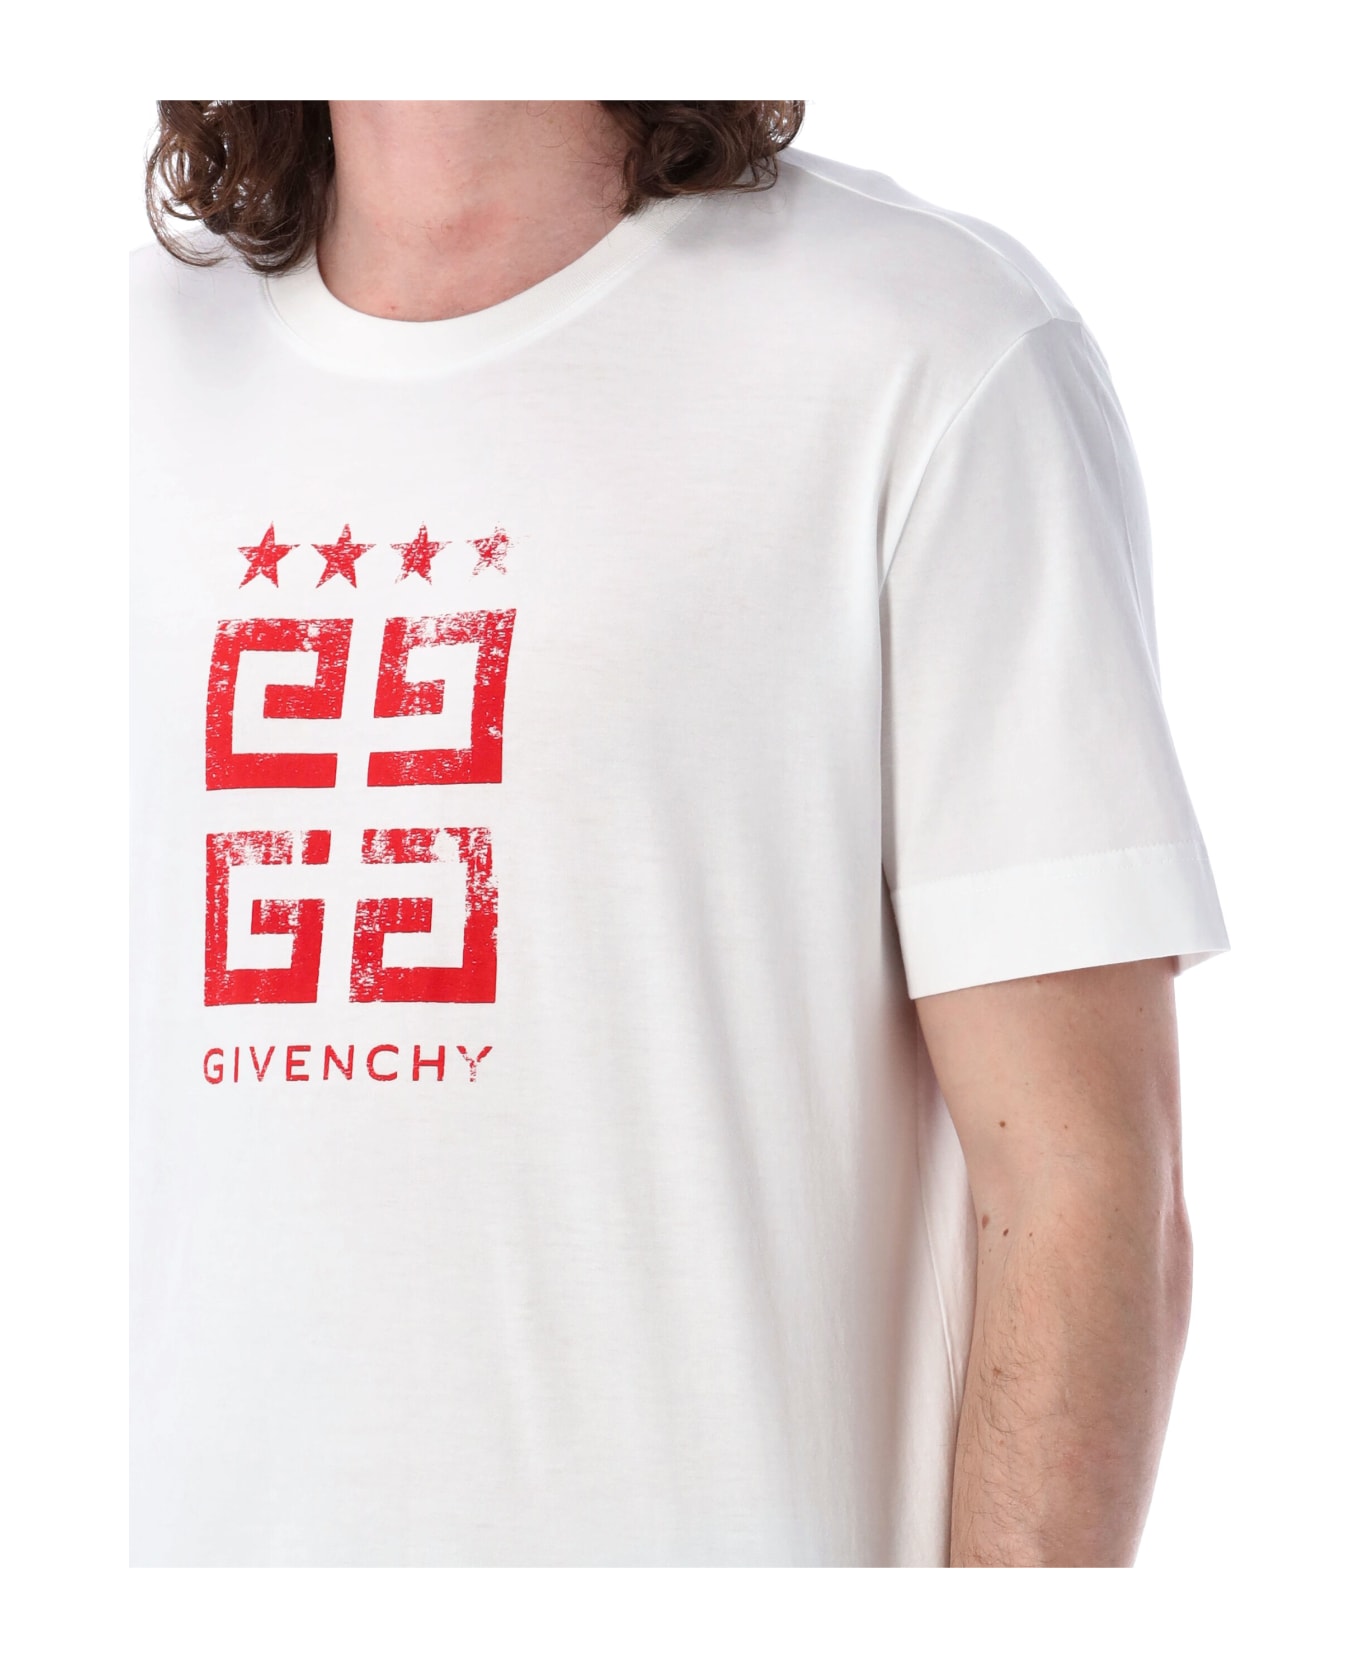 Givenchy 4g Stars T-shirt - WHITE/RED